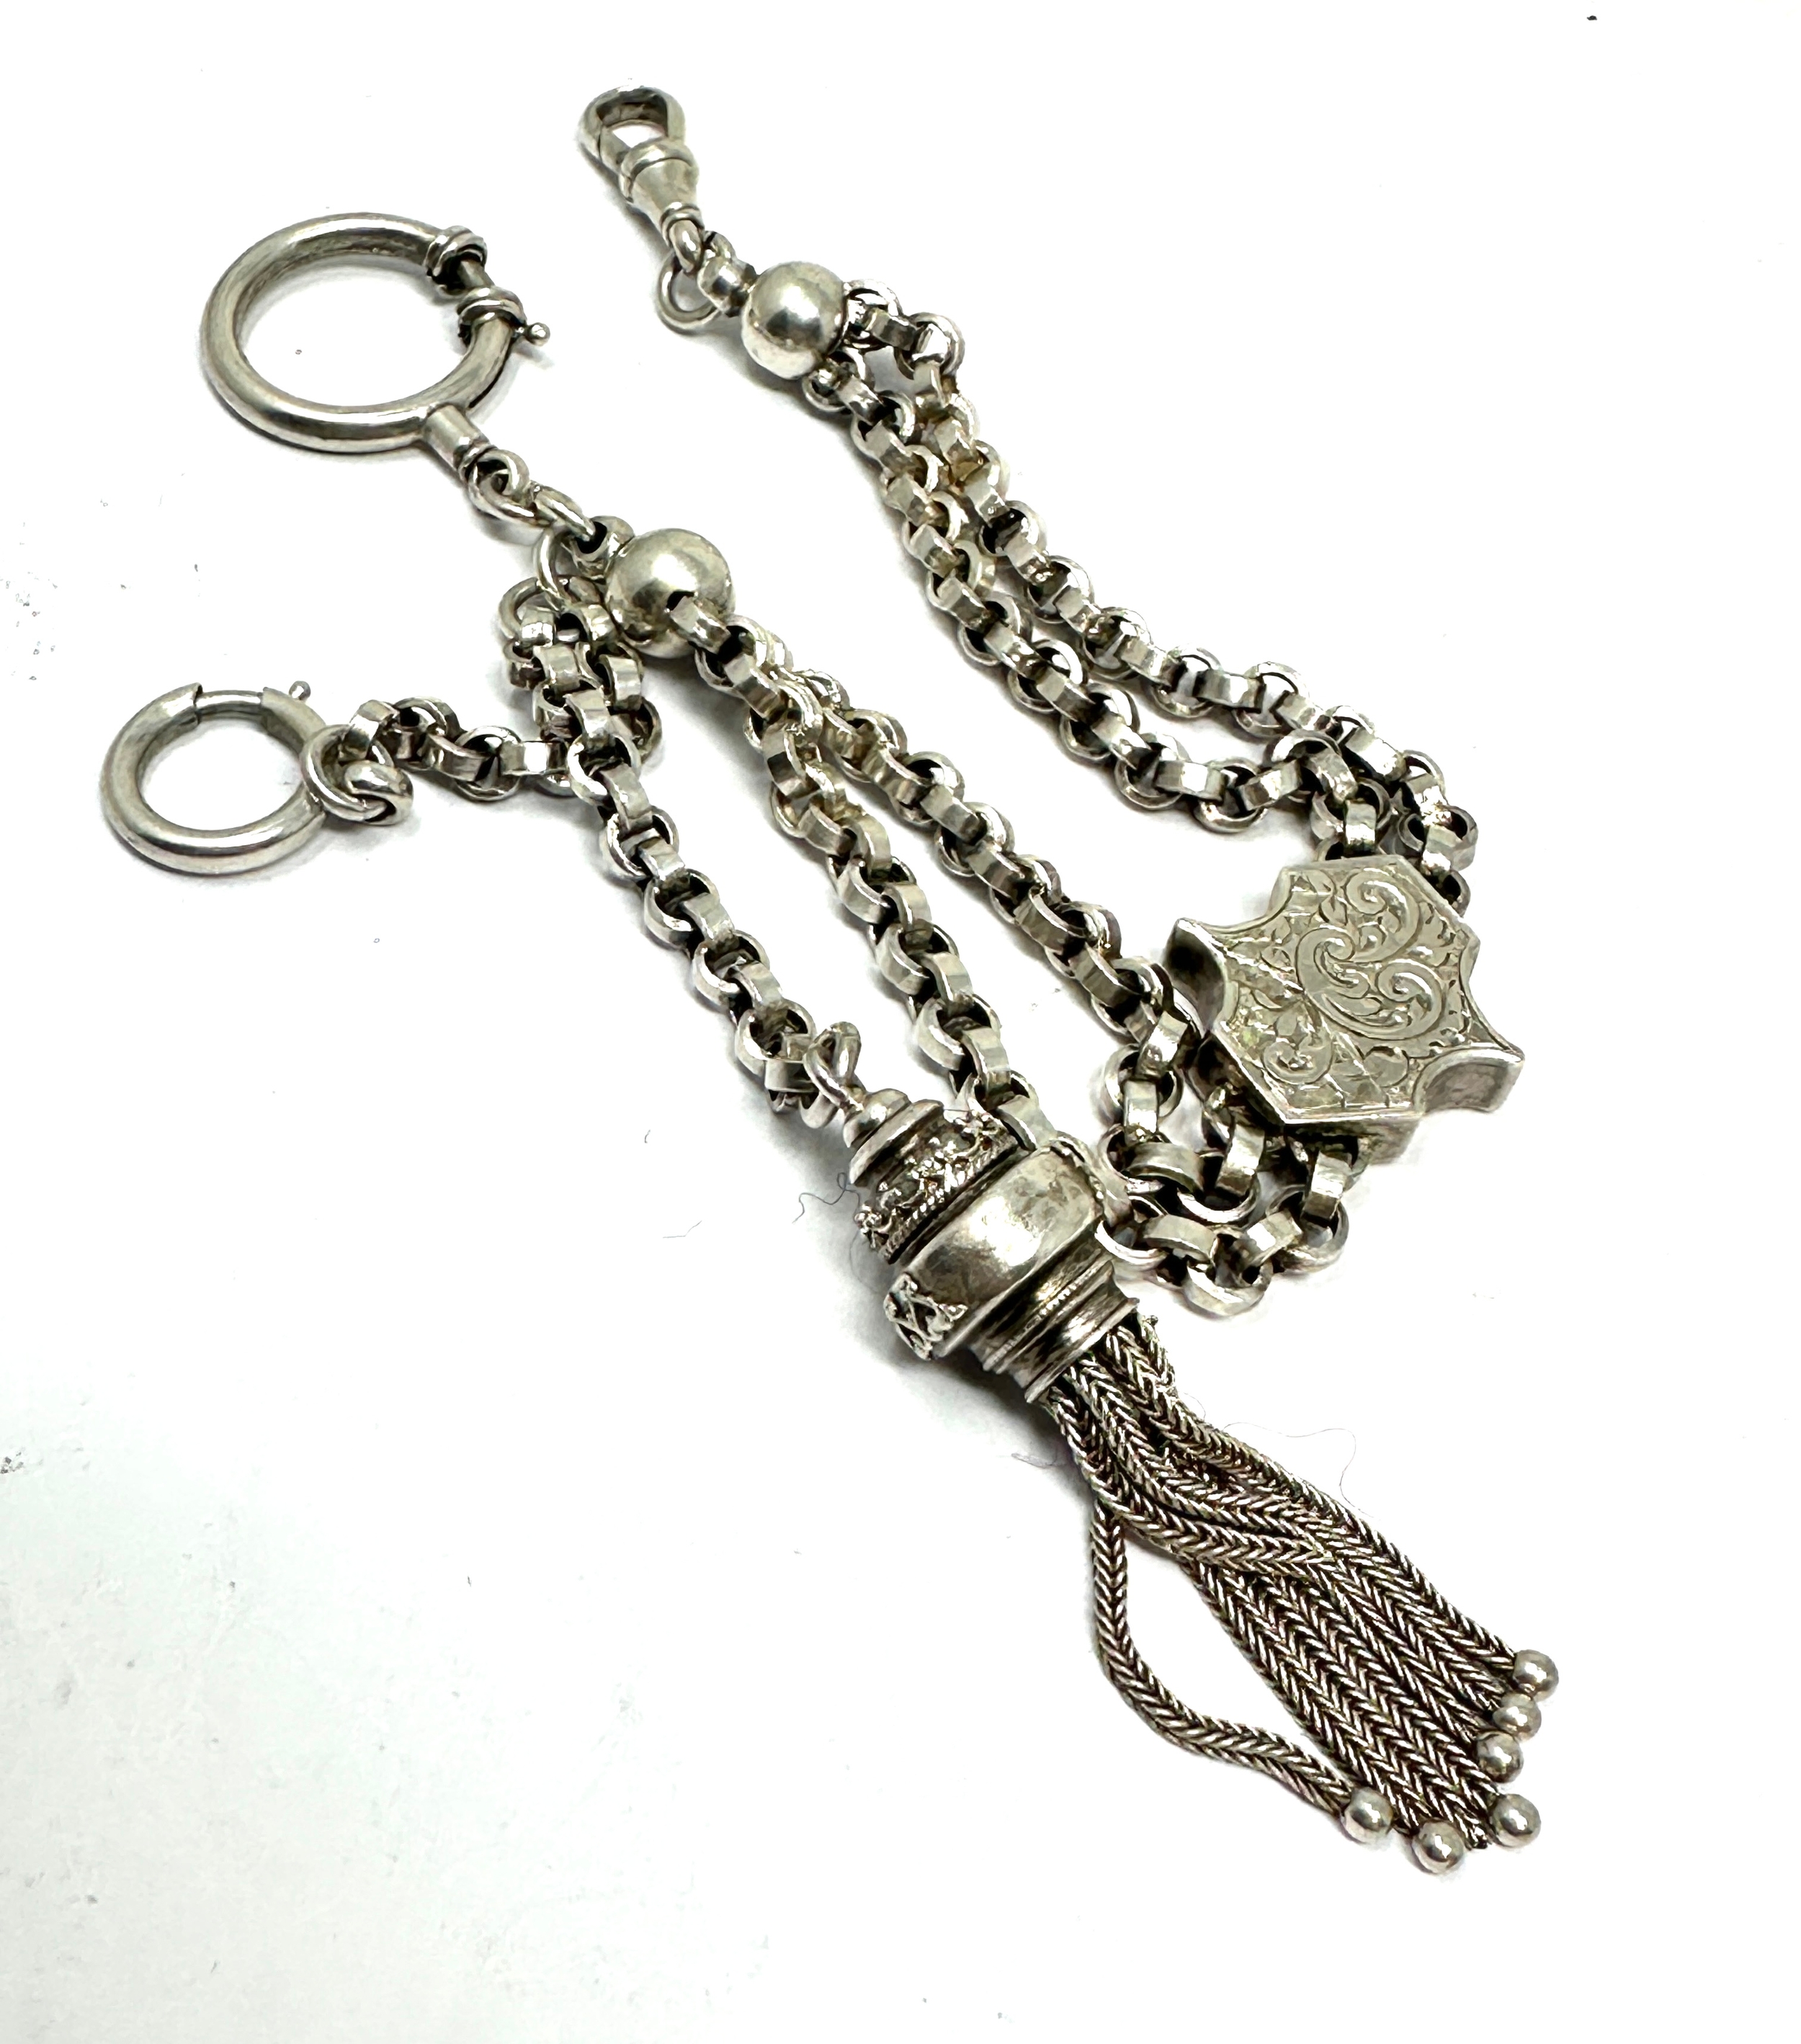 Antique silver albertina watch chain xrt tested as silver weight 23g - Image 3 of 3